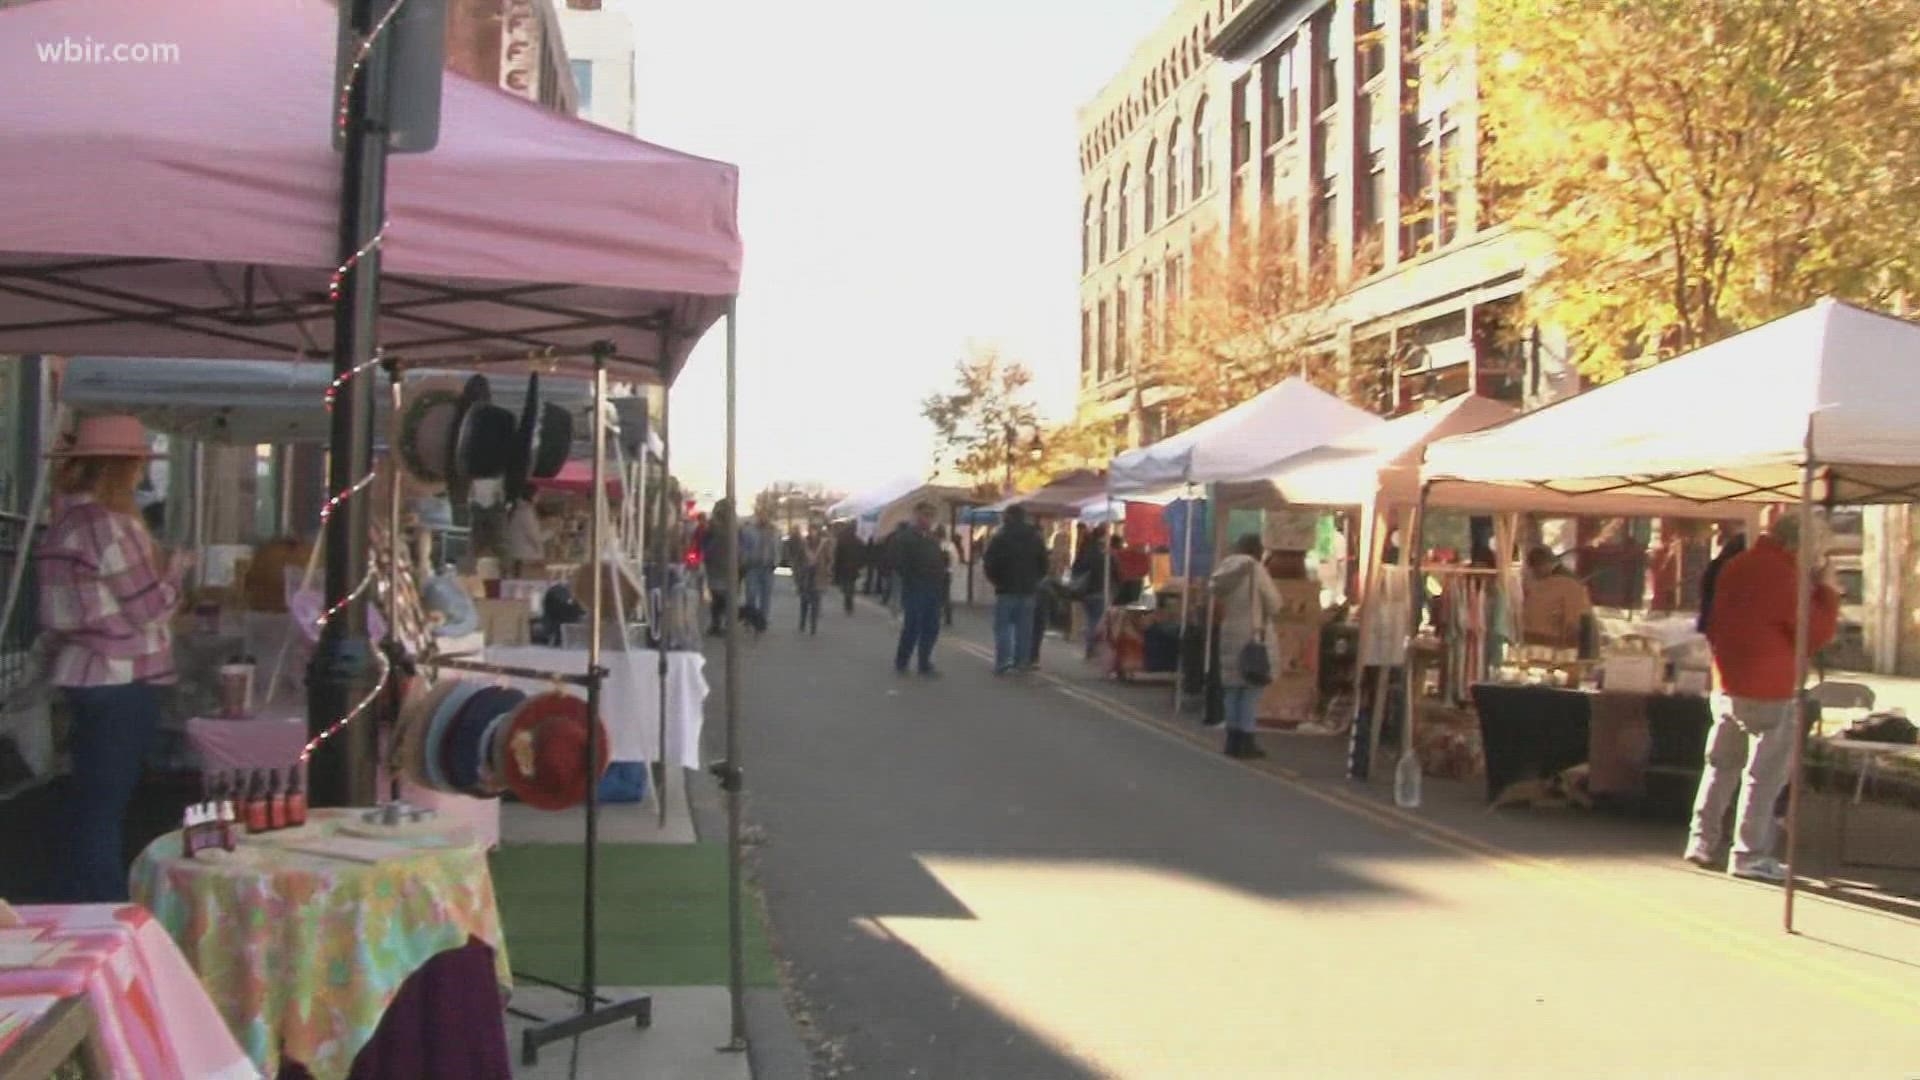 The event is held on West Jackson Avenue and included local vendors and artists of all kinds.